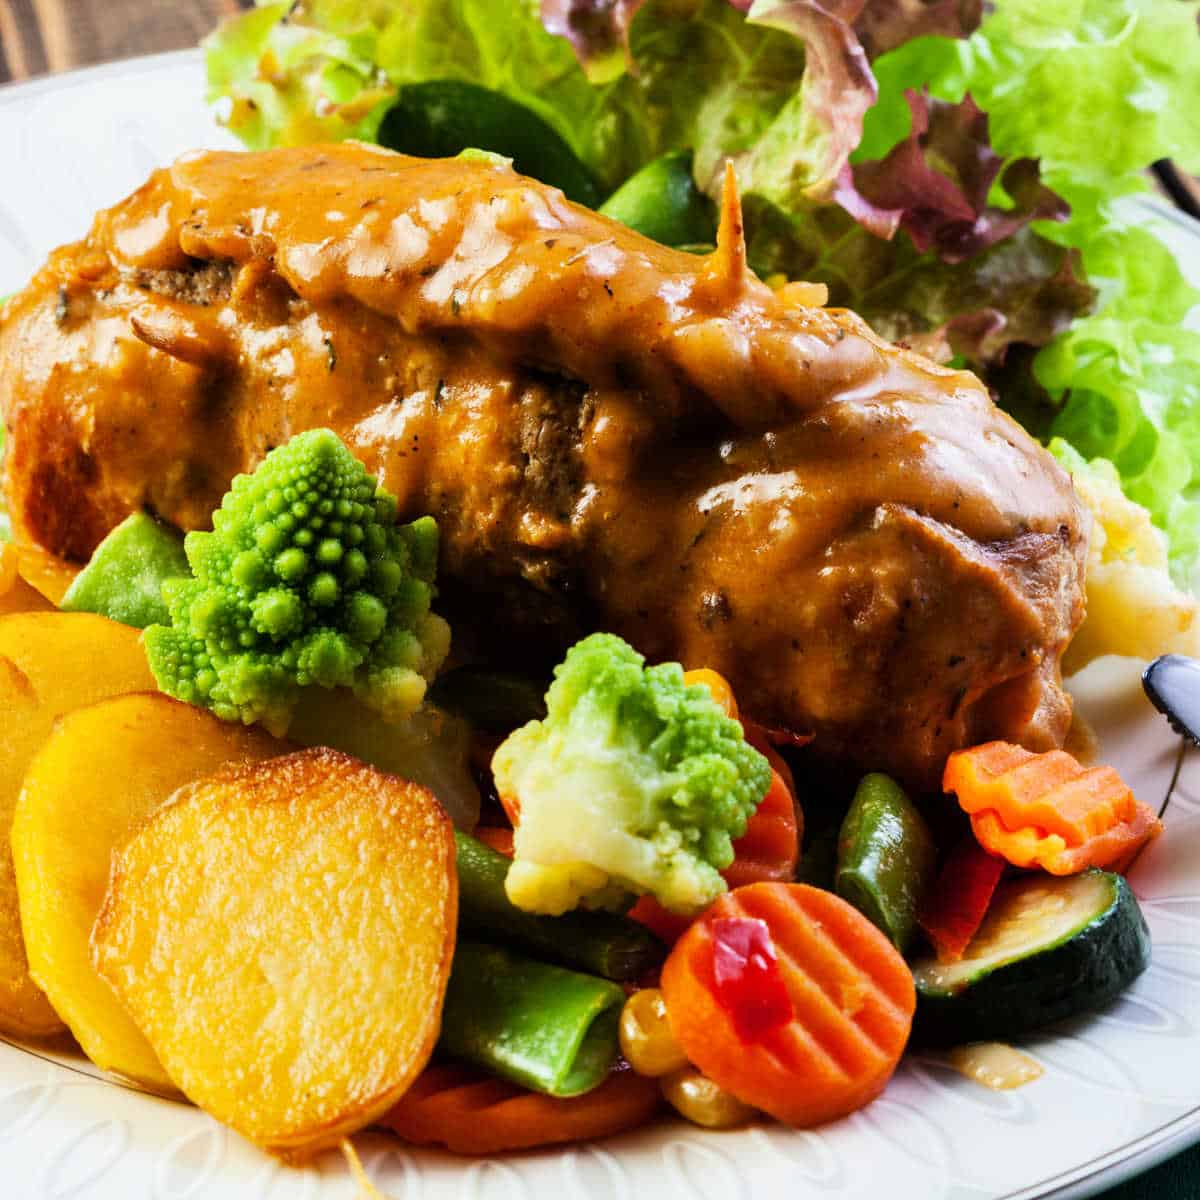 Steak Roulade with celery stuffing on a white plate smothered with gravy along with vegetables and potatoes.